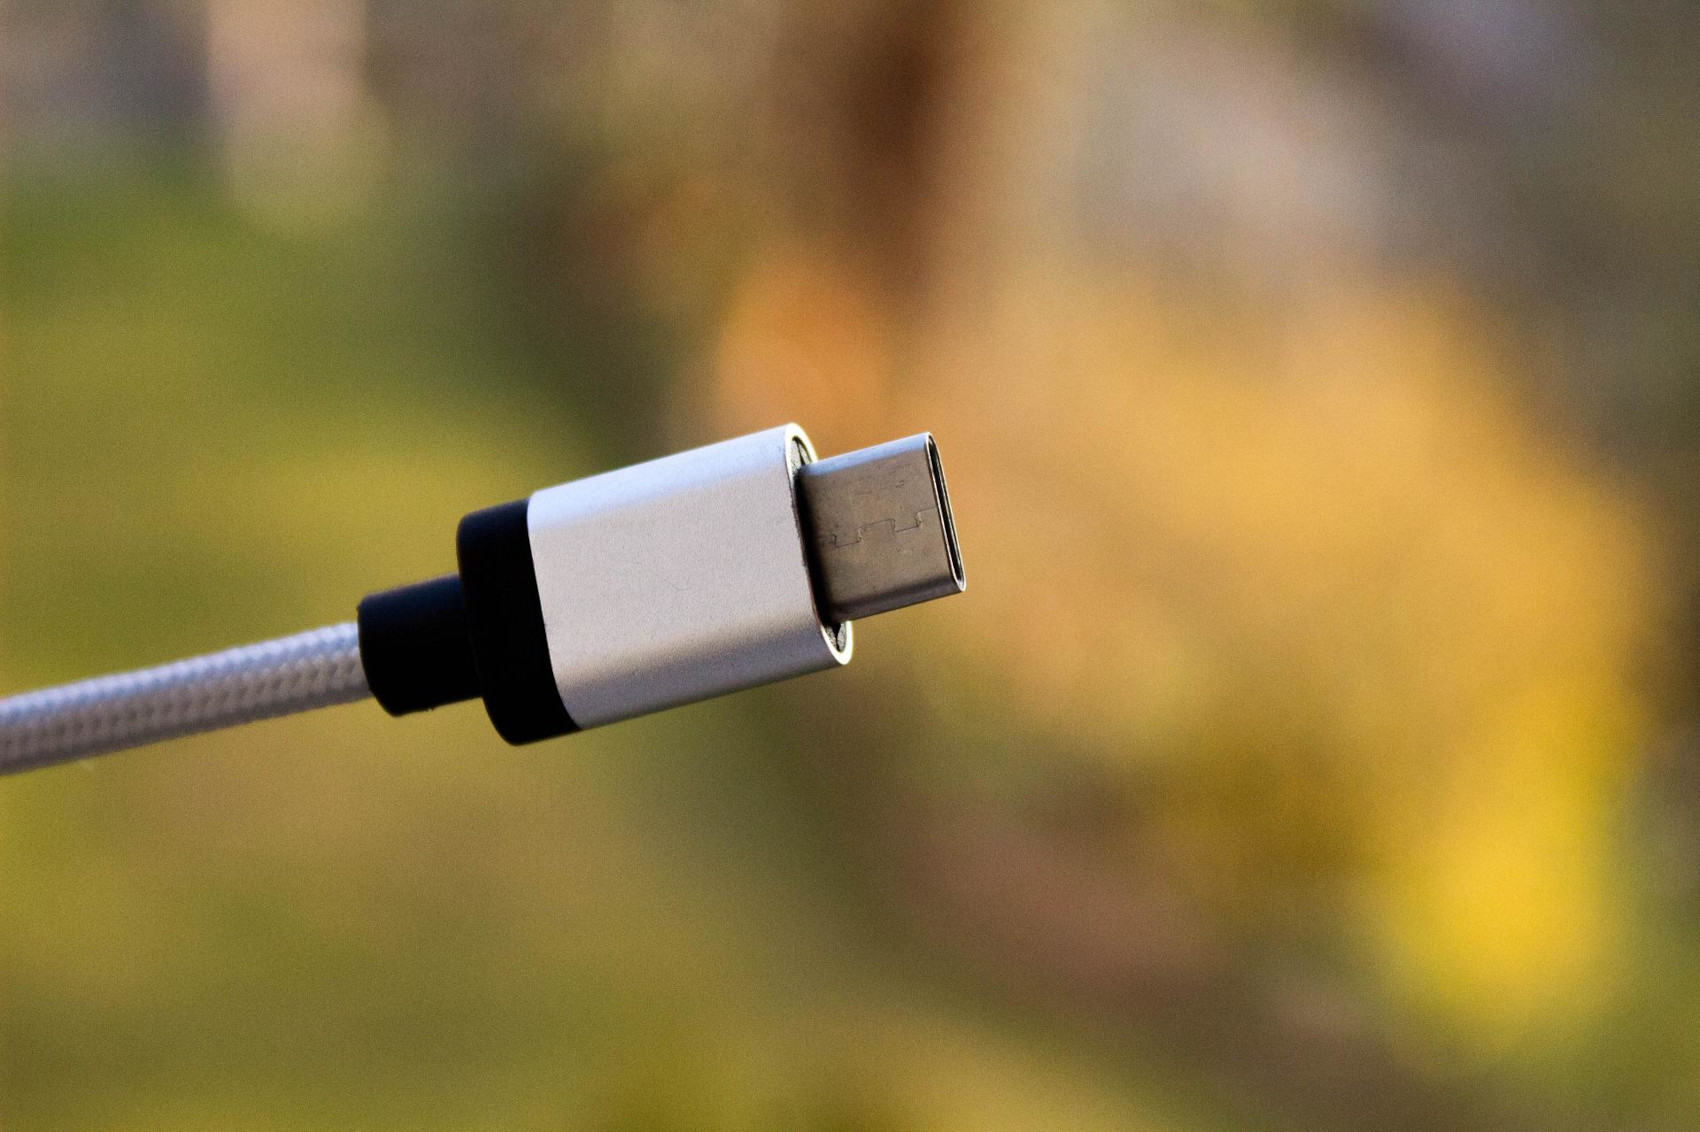 USB-C Connector - Image by Denys Vitali